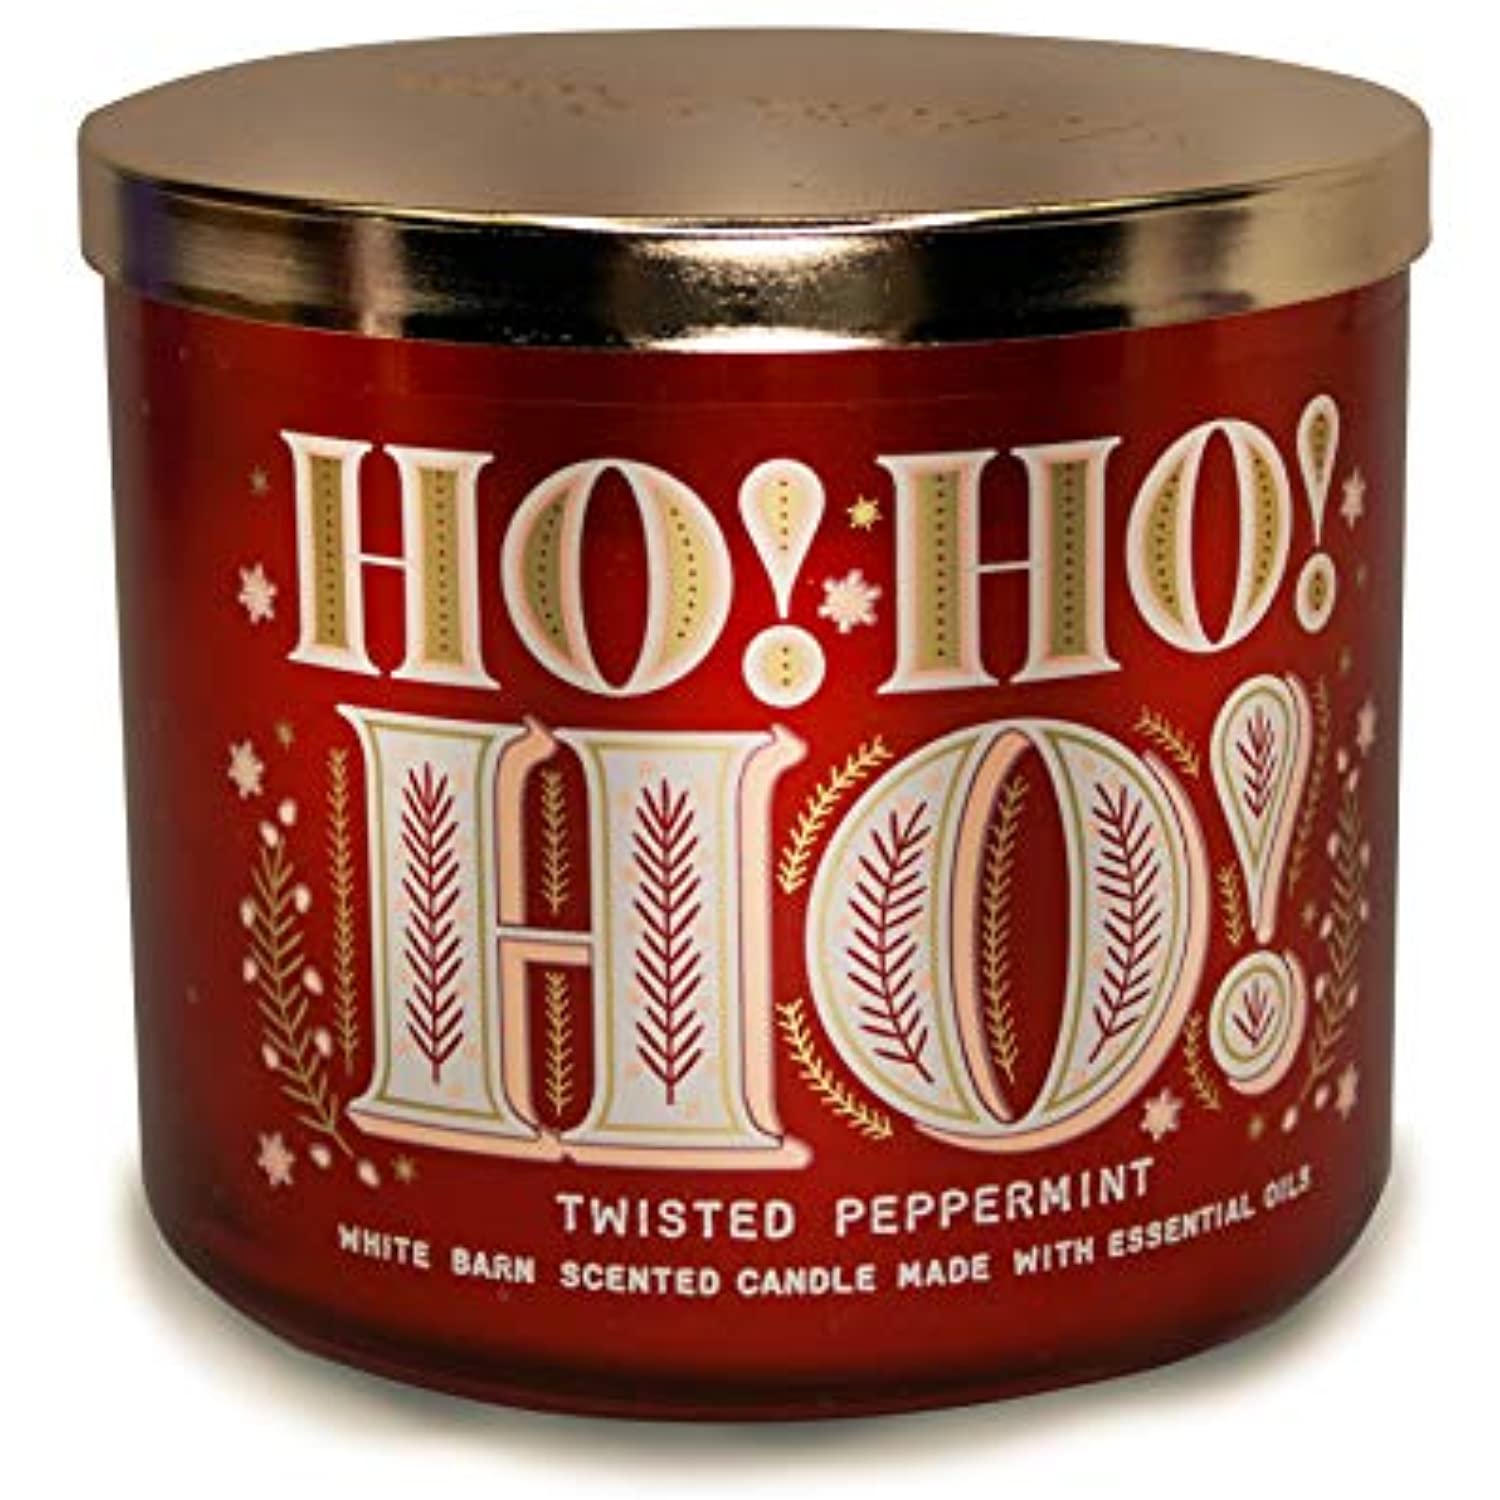 White Barn 3-Wick Candle w/Essential Oils - 14.5 oz - 2020 Holidays Scents! (Twisted Peppermint) - image 2 of 7